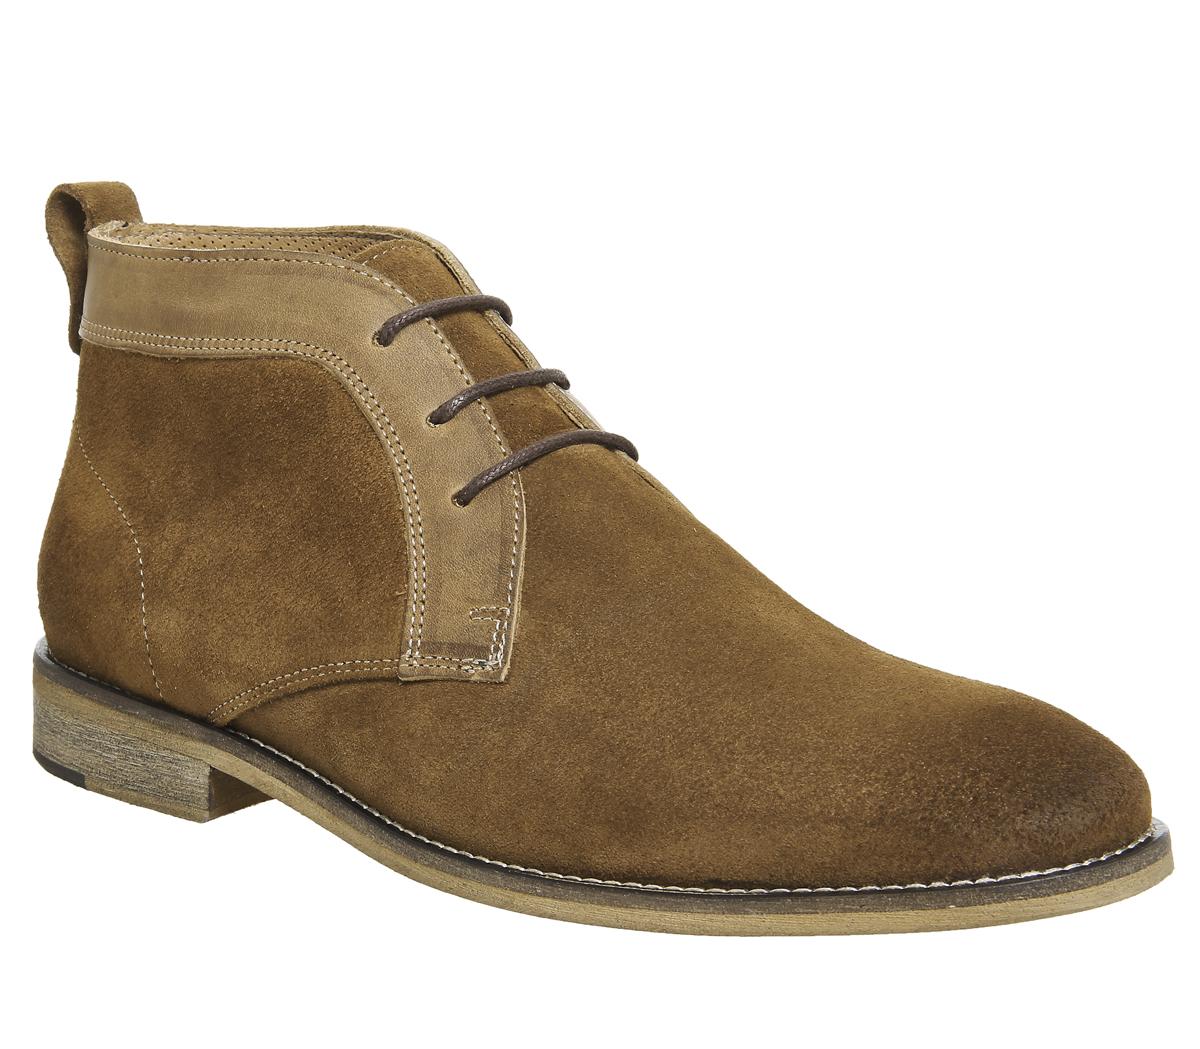 Ask the MissusGemma Chukka BootsRust Suede Tan Leather